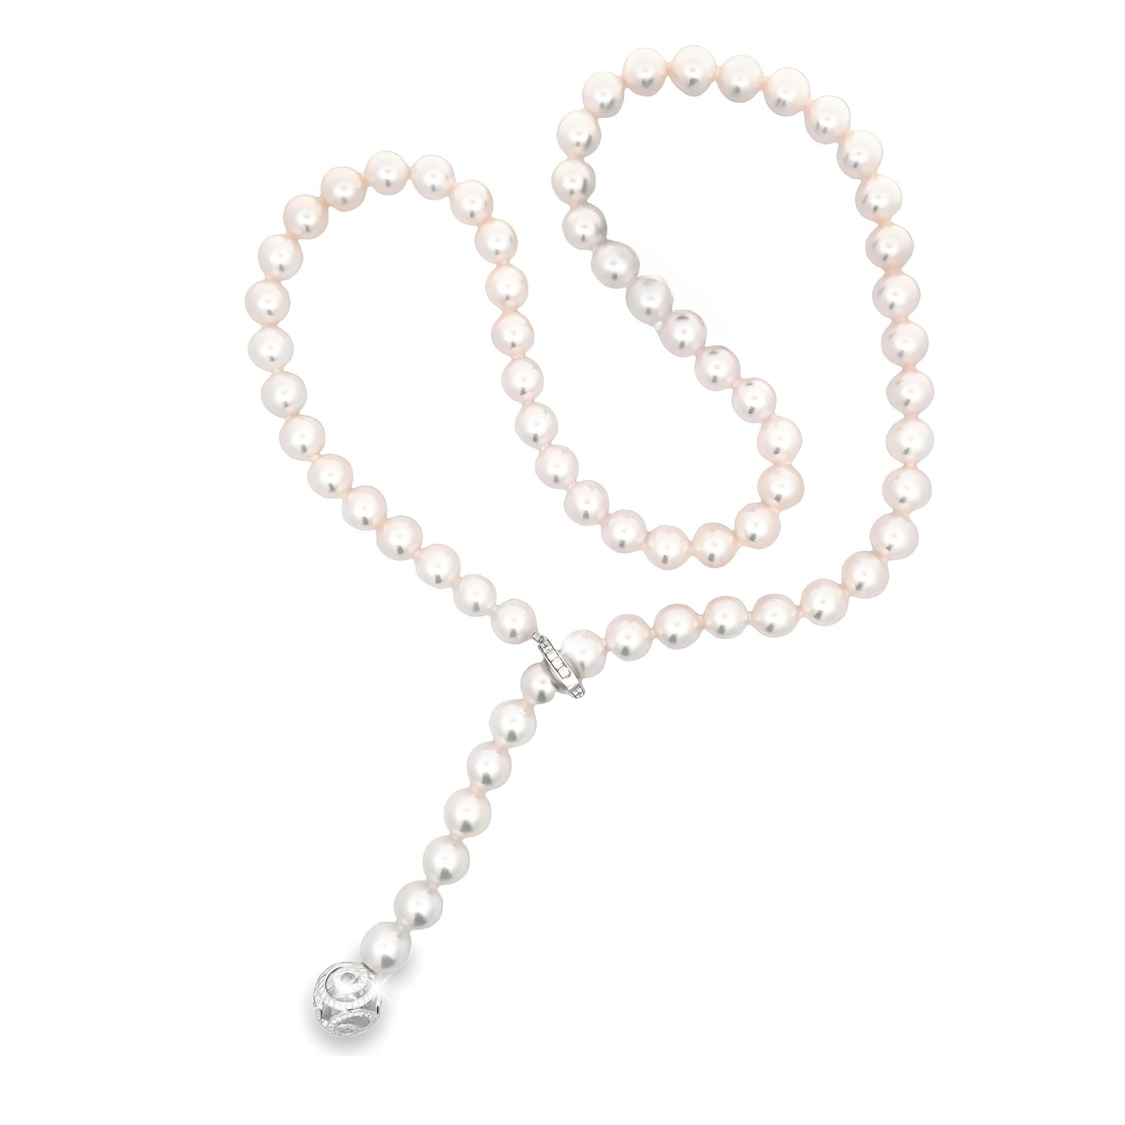 Mikimoto 18K White Gold Lariat with 66 Round Japanese Cutlured Akoya Pearls A  8X7mm with12mm Sphere with 167 Round Brilliant Cut Diamonds 0.45 Tcw F-G VS